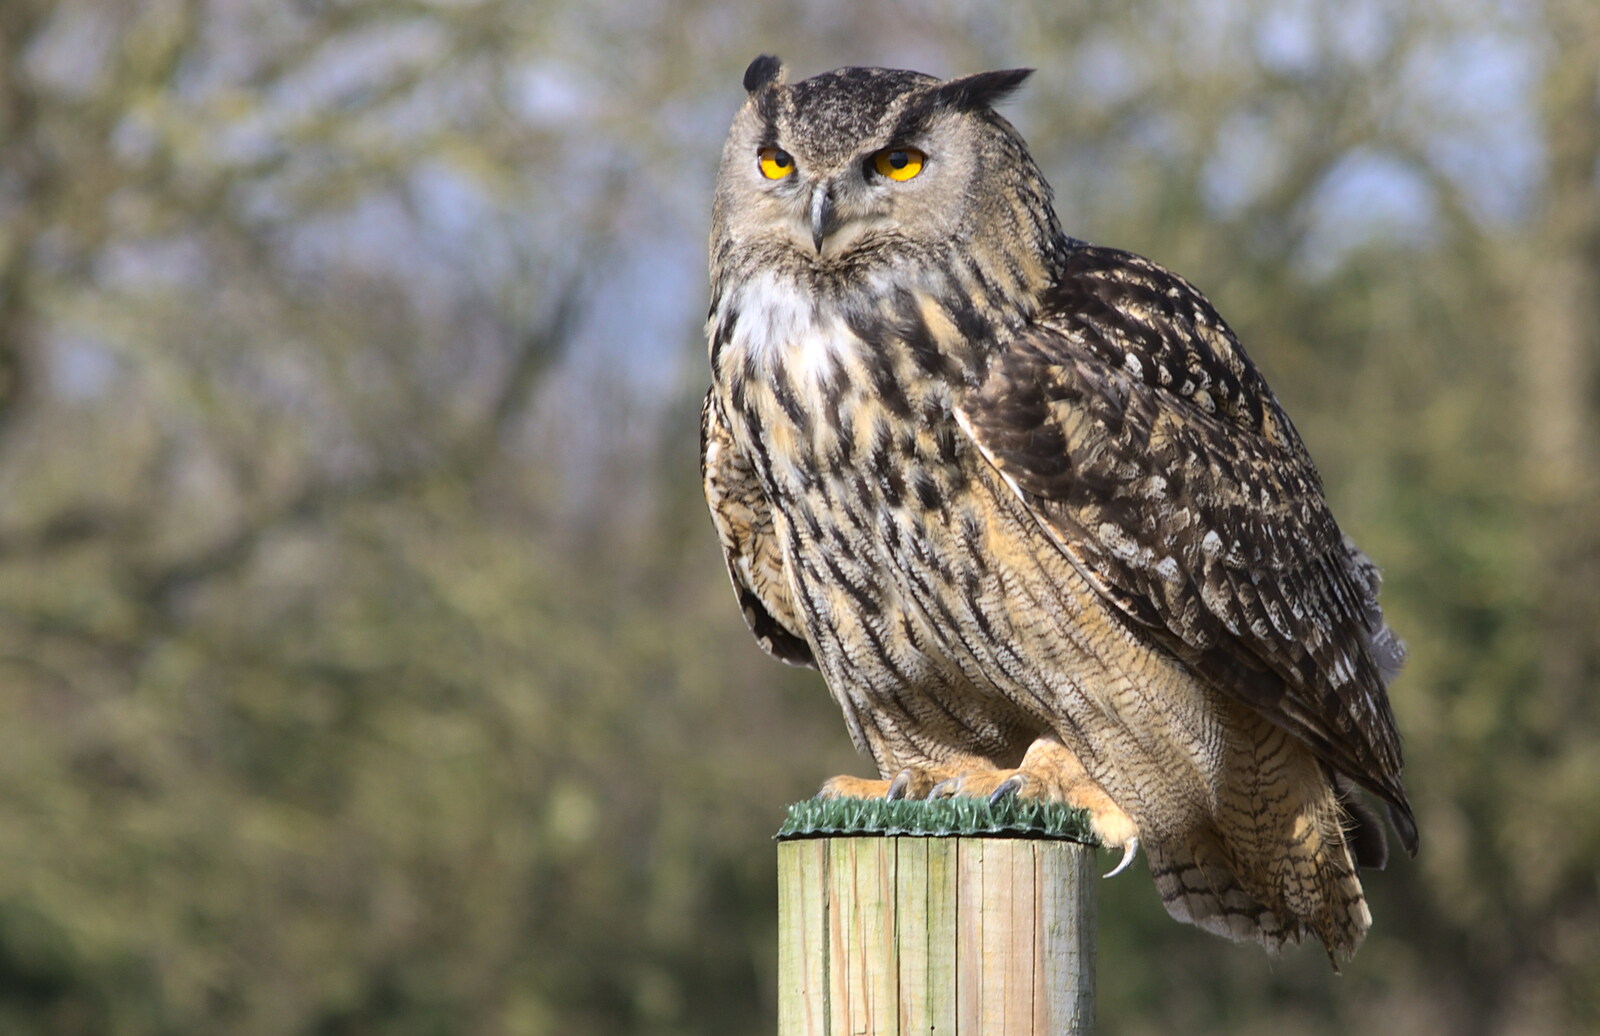 An owl on a perch from Another Trip to Banham Zoo, Banham, Norfolk - 25th March 2016